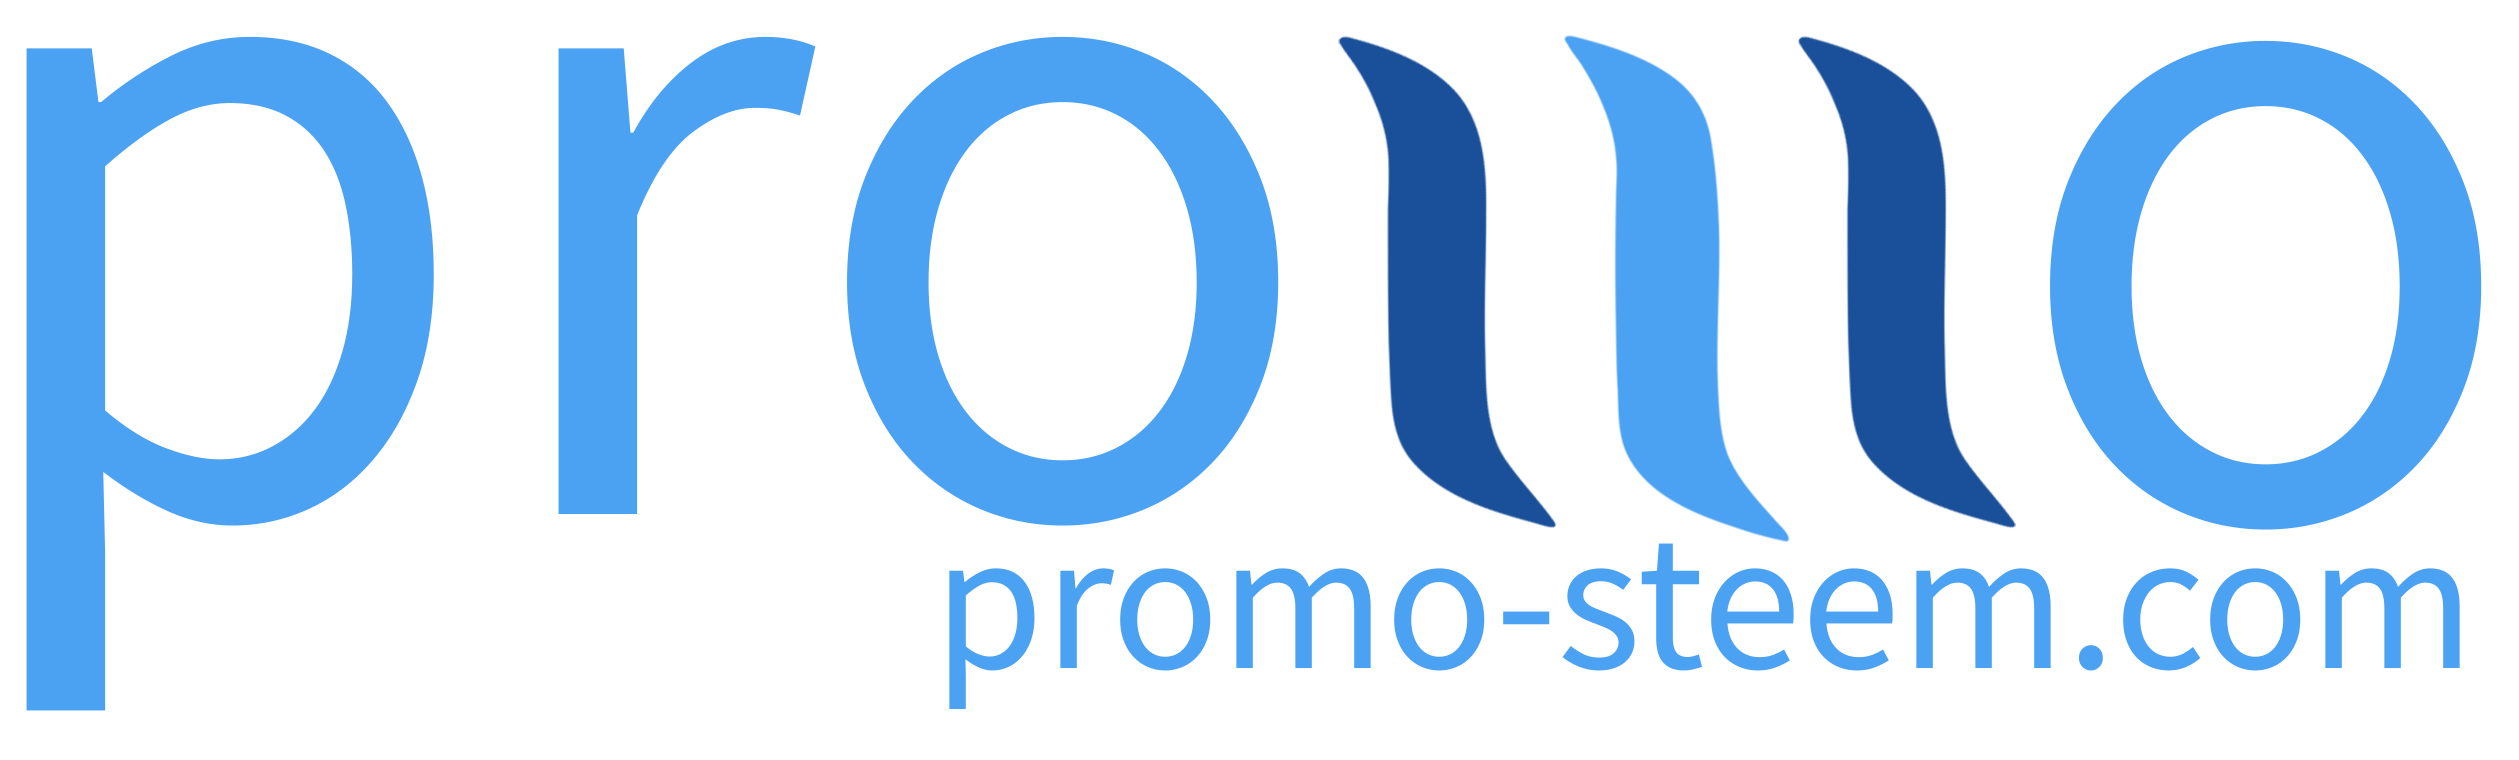 promo-steem logo with promo-steem dot com footer.png